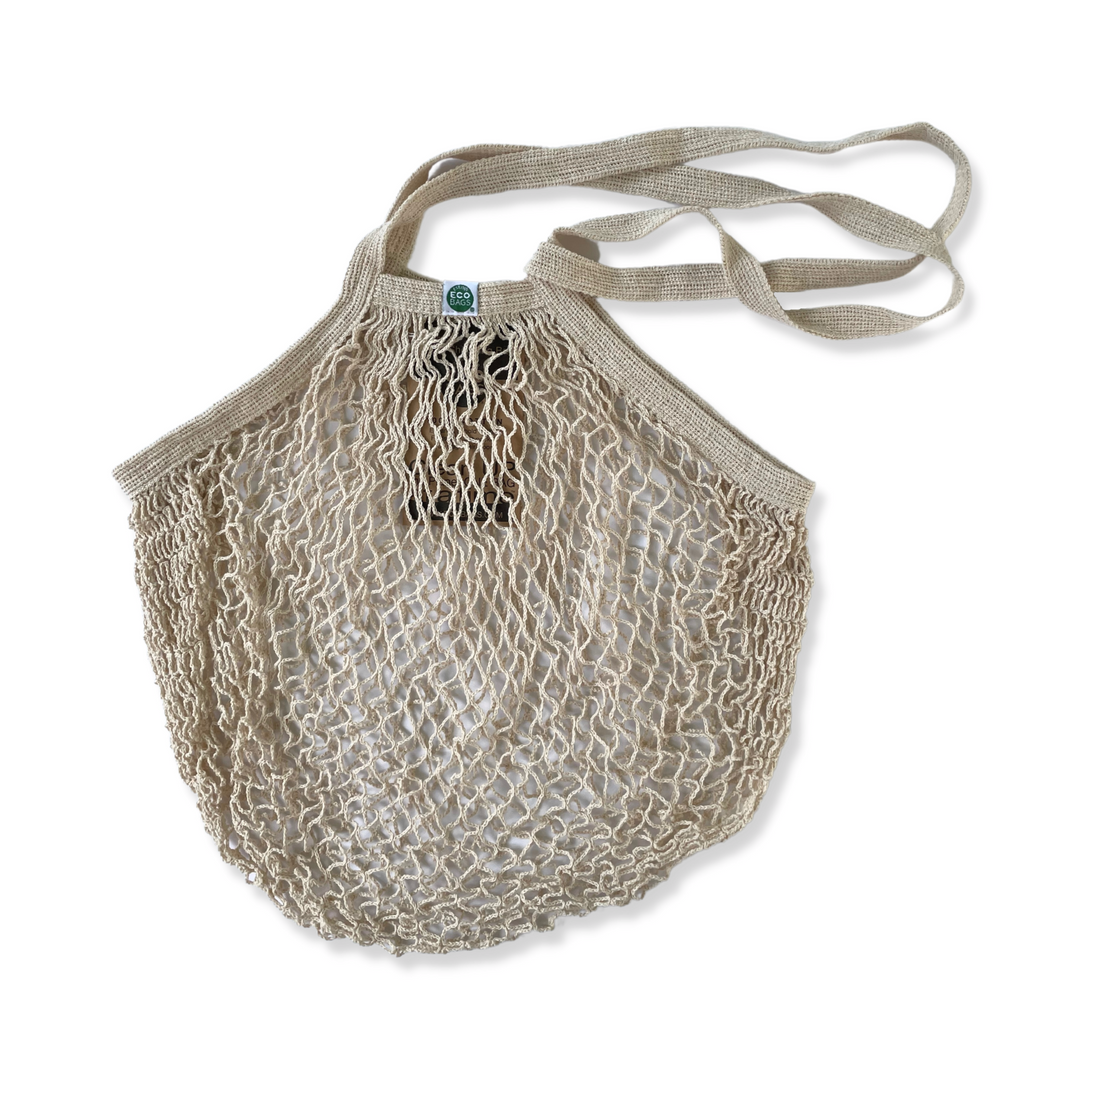 Ecobags String Bag In Natural Color On White Background.